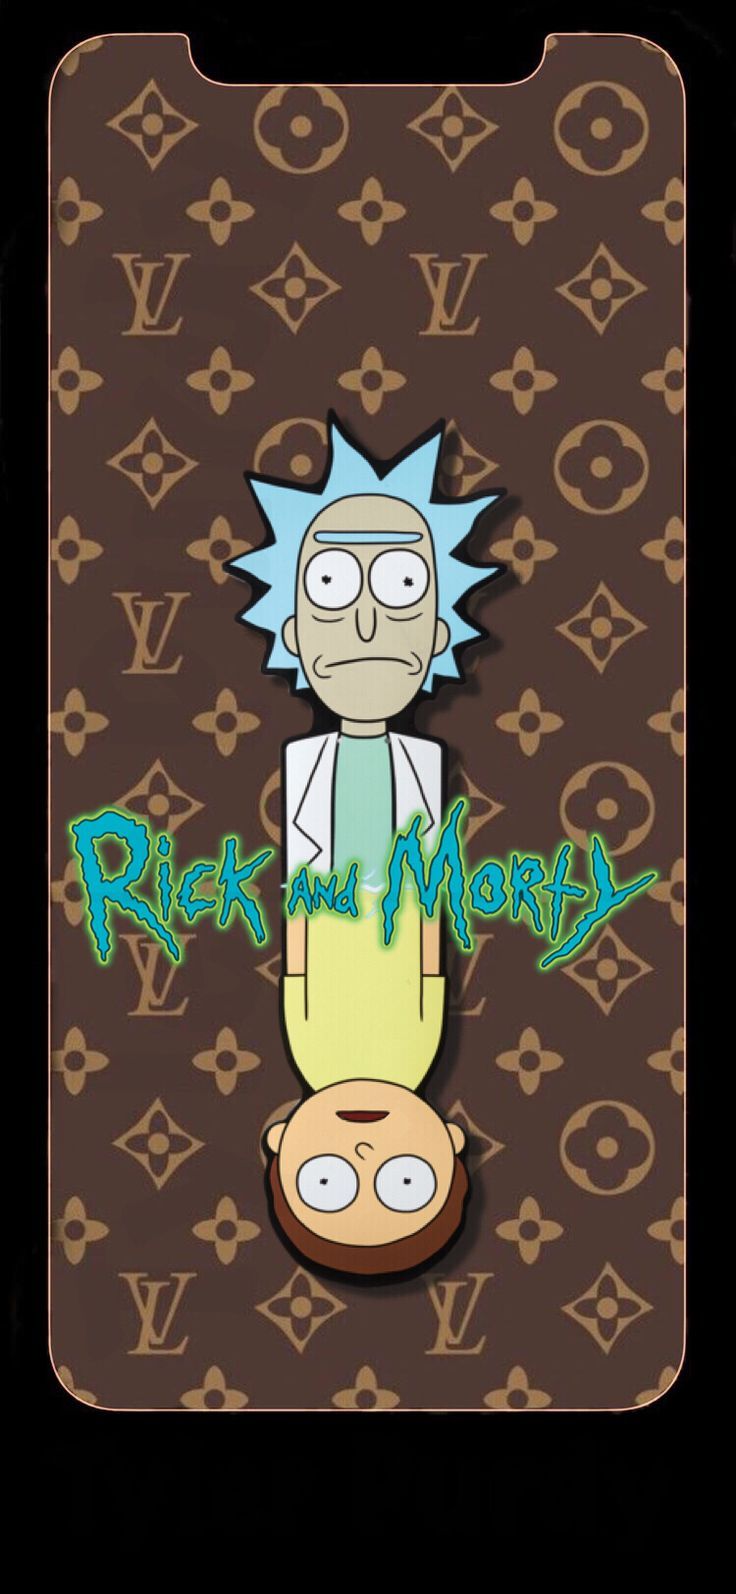 Rick and Morty Wallpaper iphone: Rick y morty Louis Vuitton